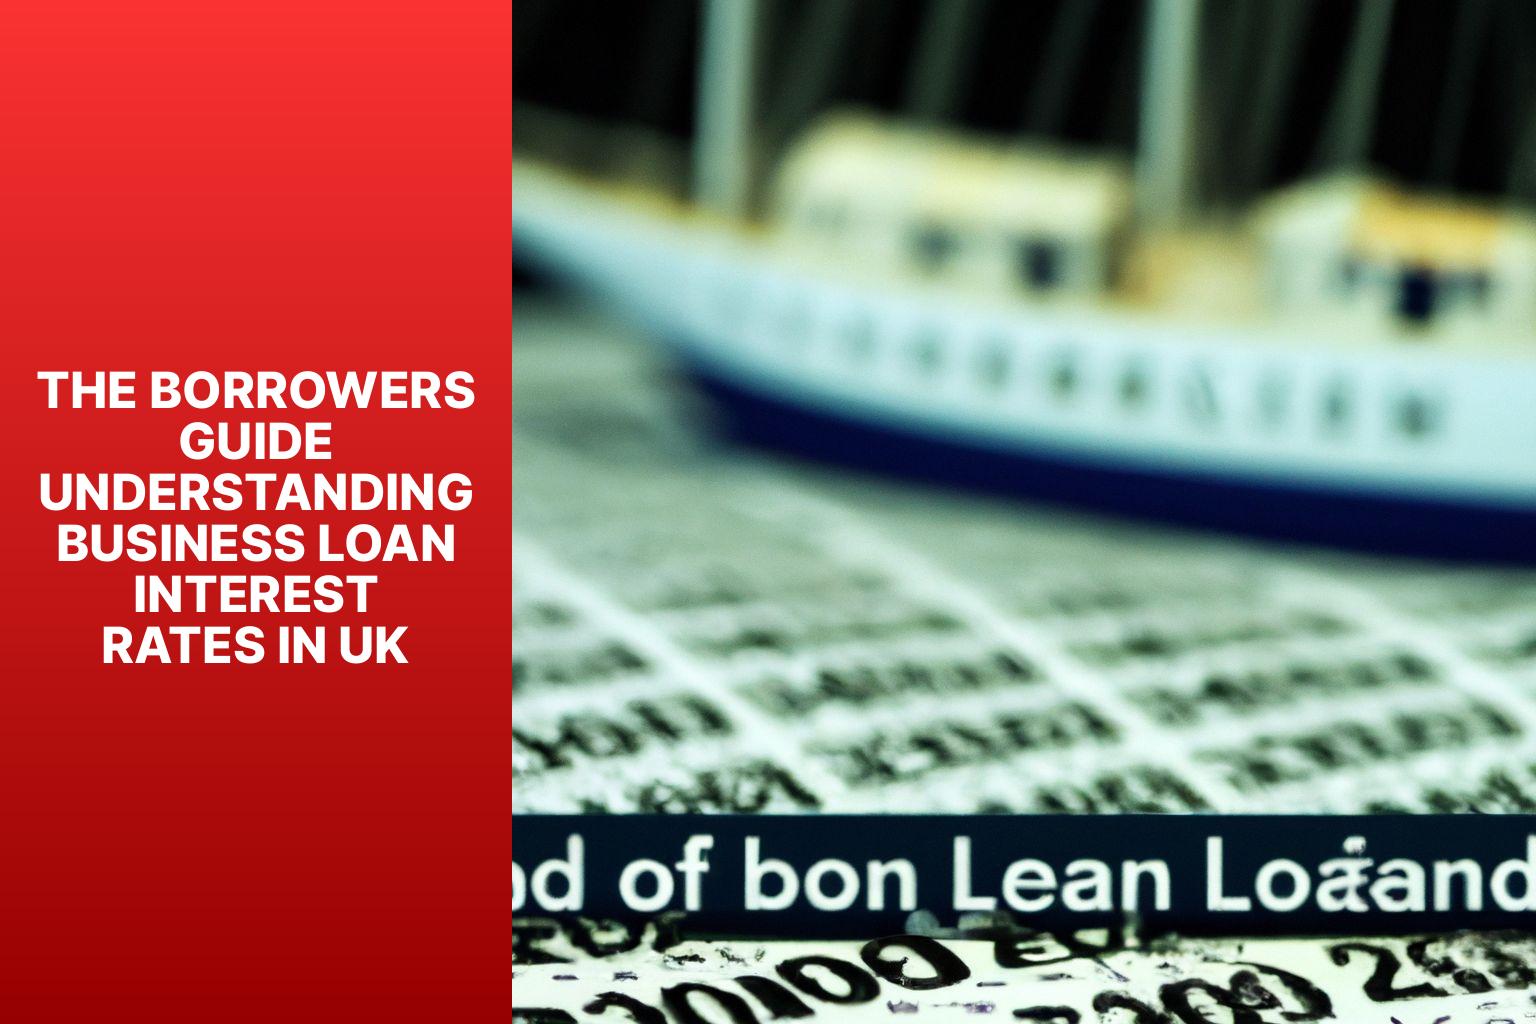 The Borrowers Guide Understanding Business Loan Interest Rates in UK